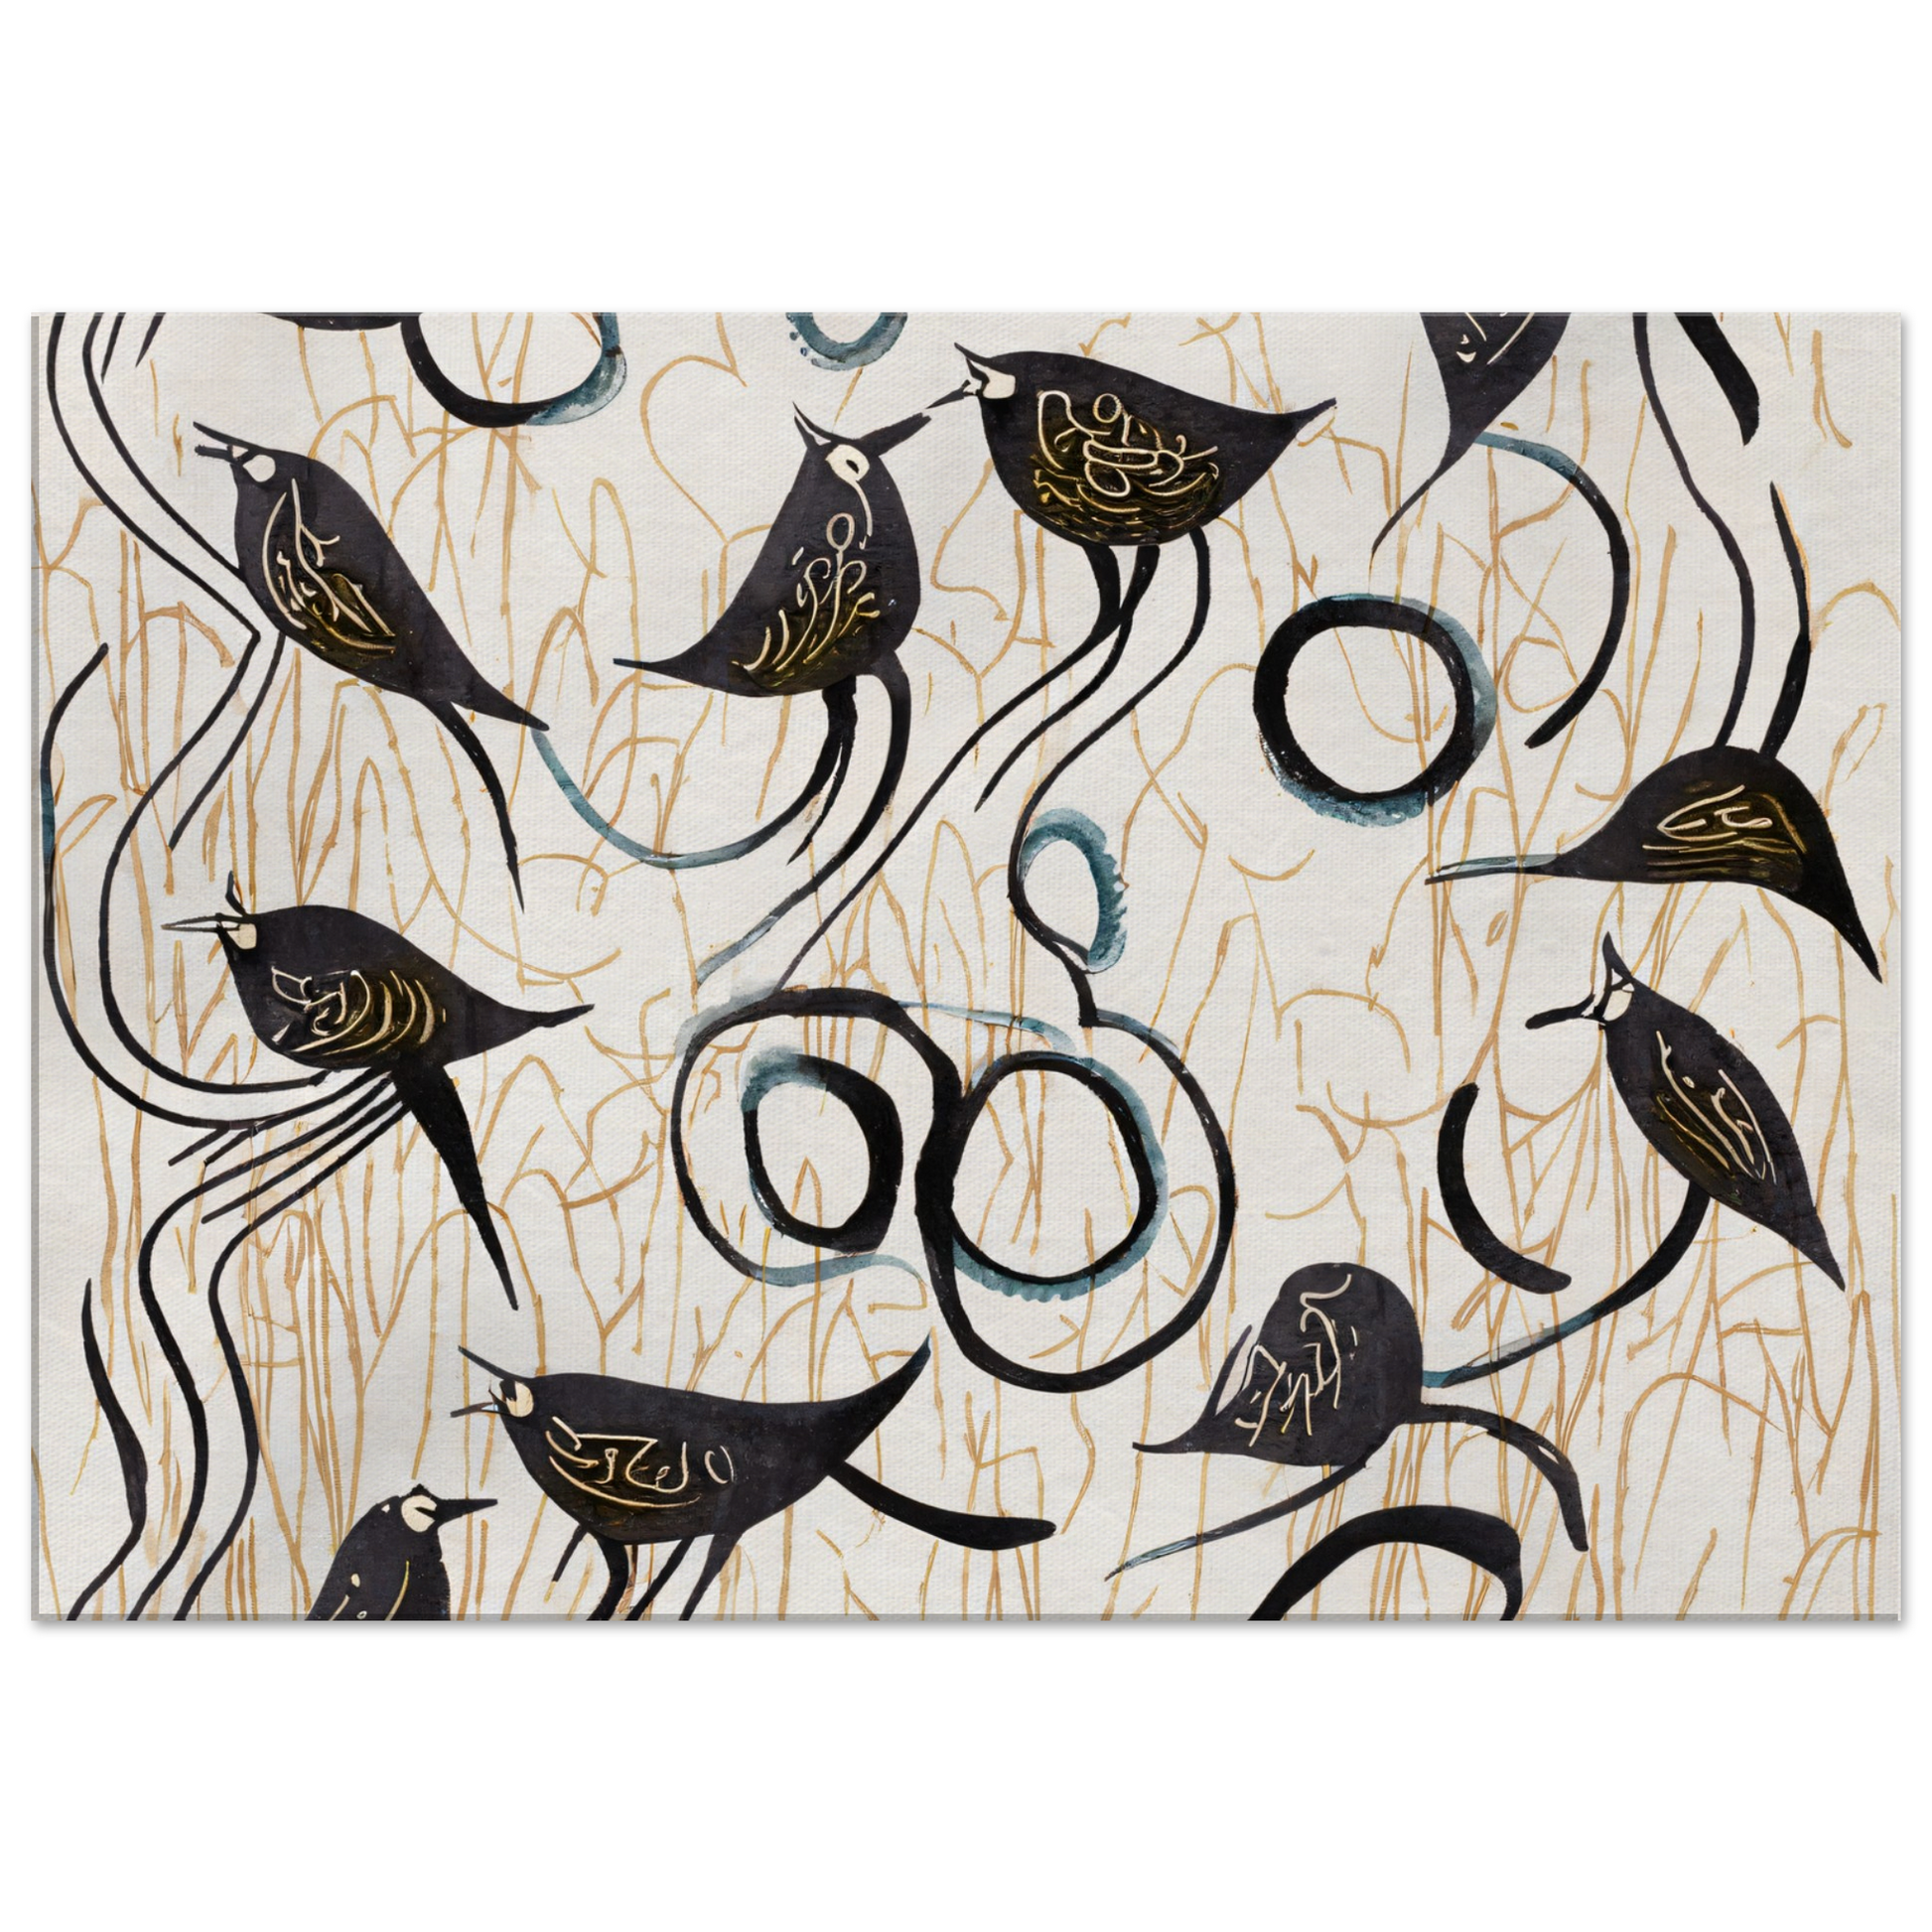 Canvas with birds line pattern by Posterify Design - Posterify